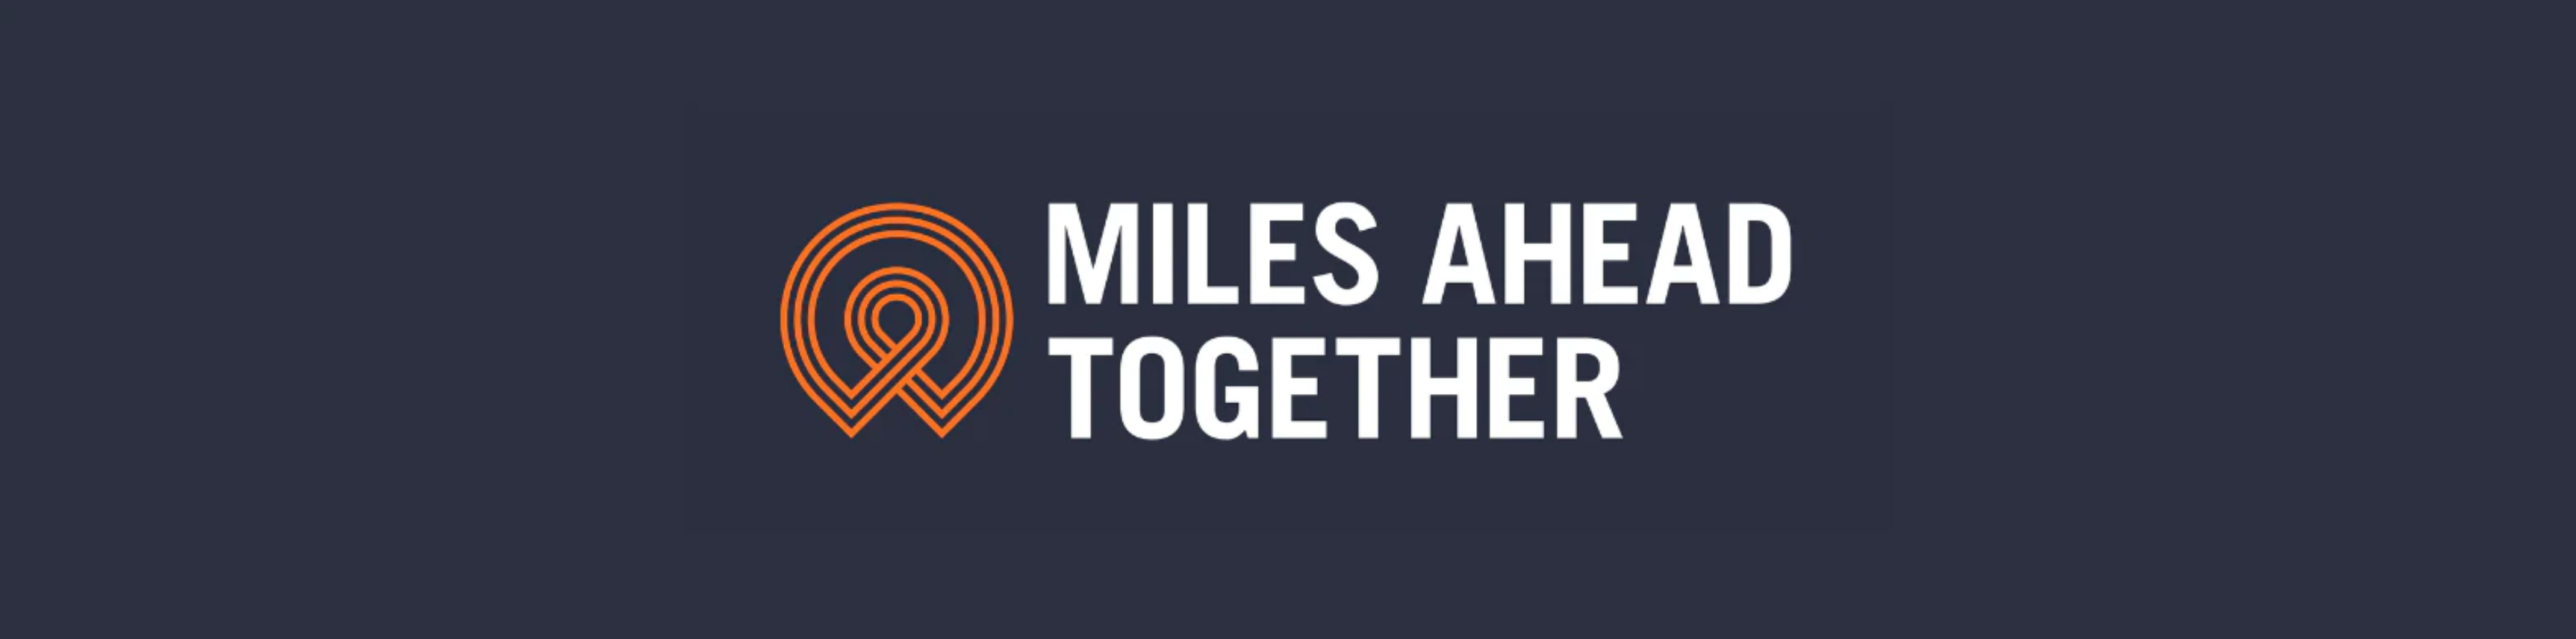 Milers ahead together Pearson